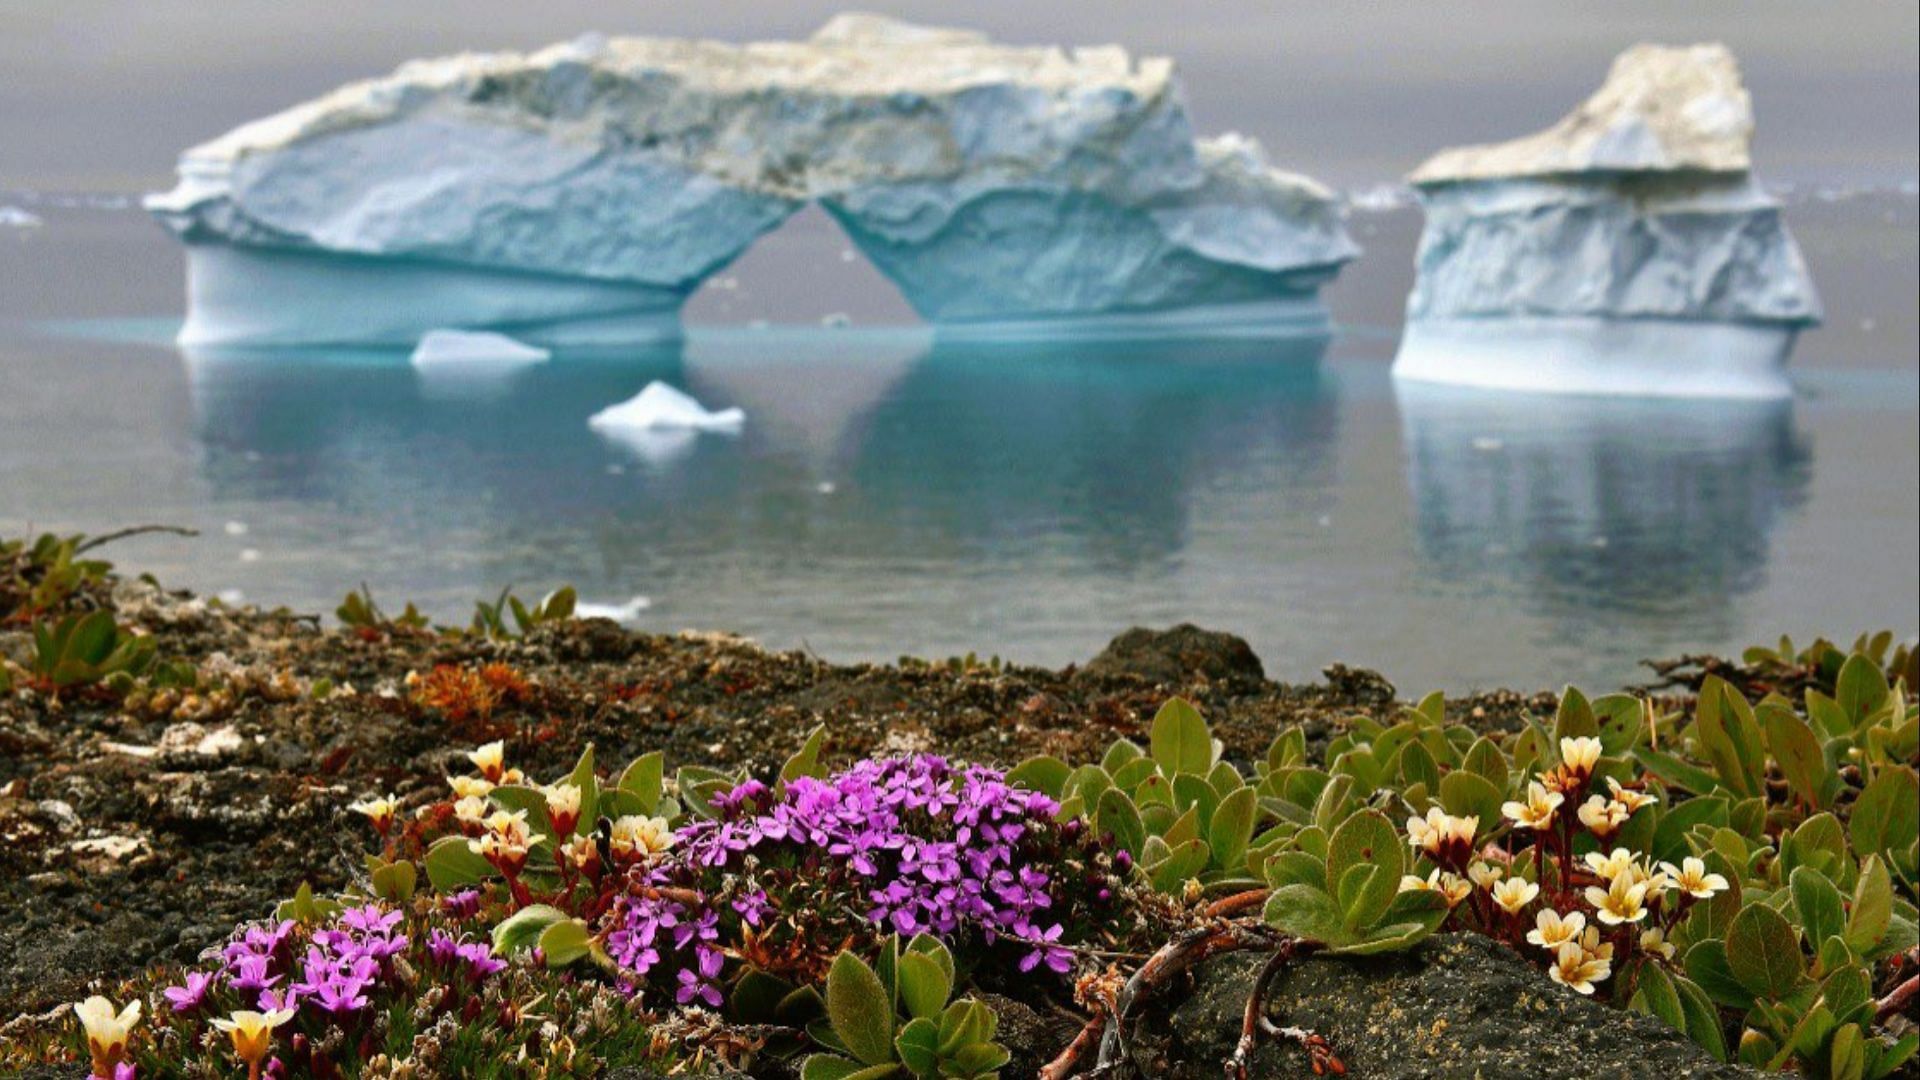 Plants are growing at a rapid rate in Antarctica (Image via X/@Socialistdawn)